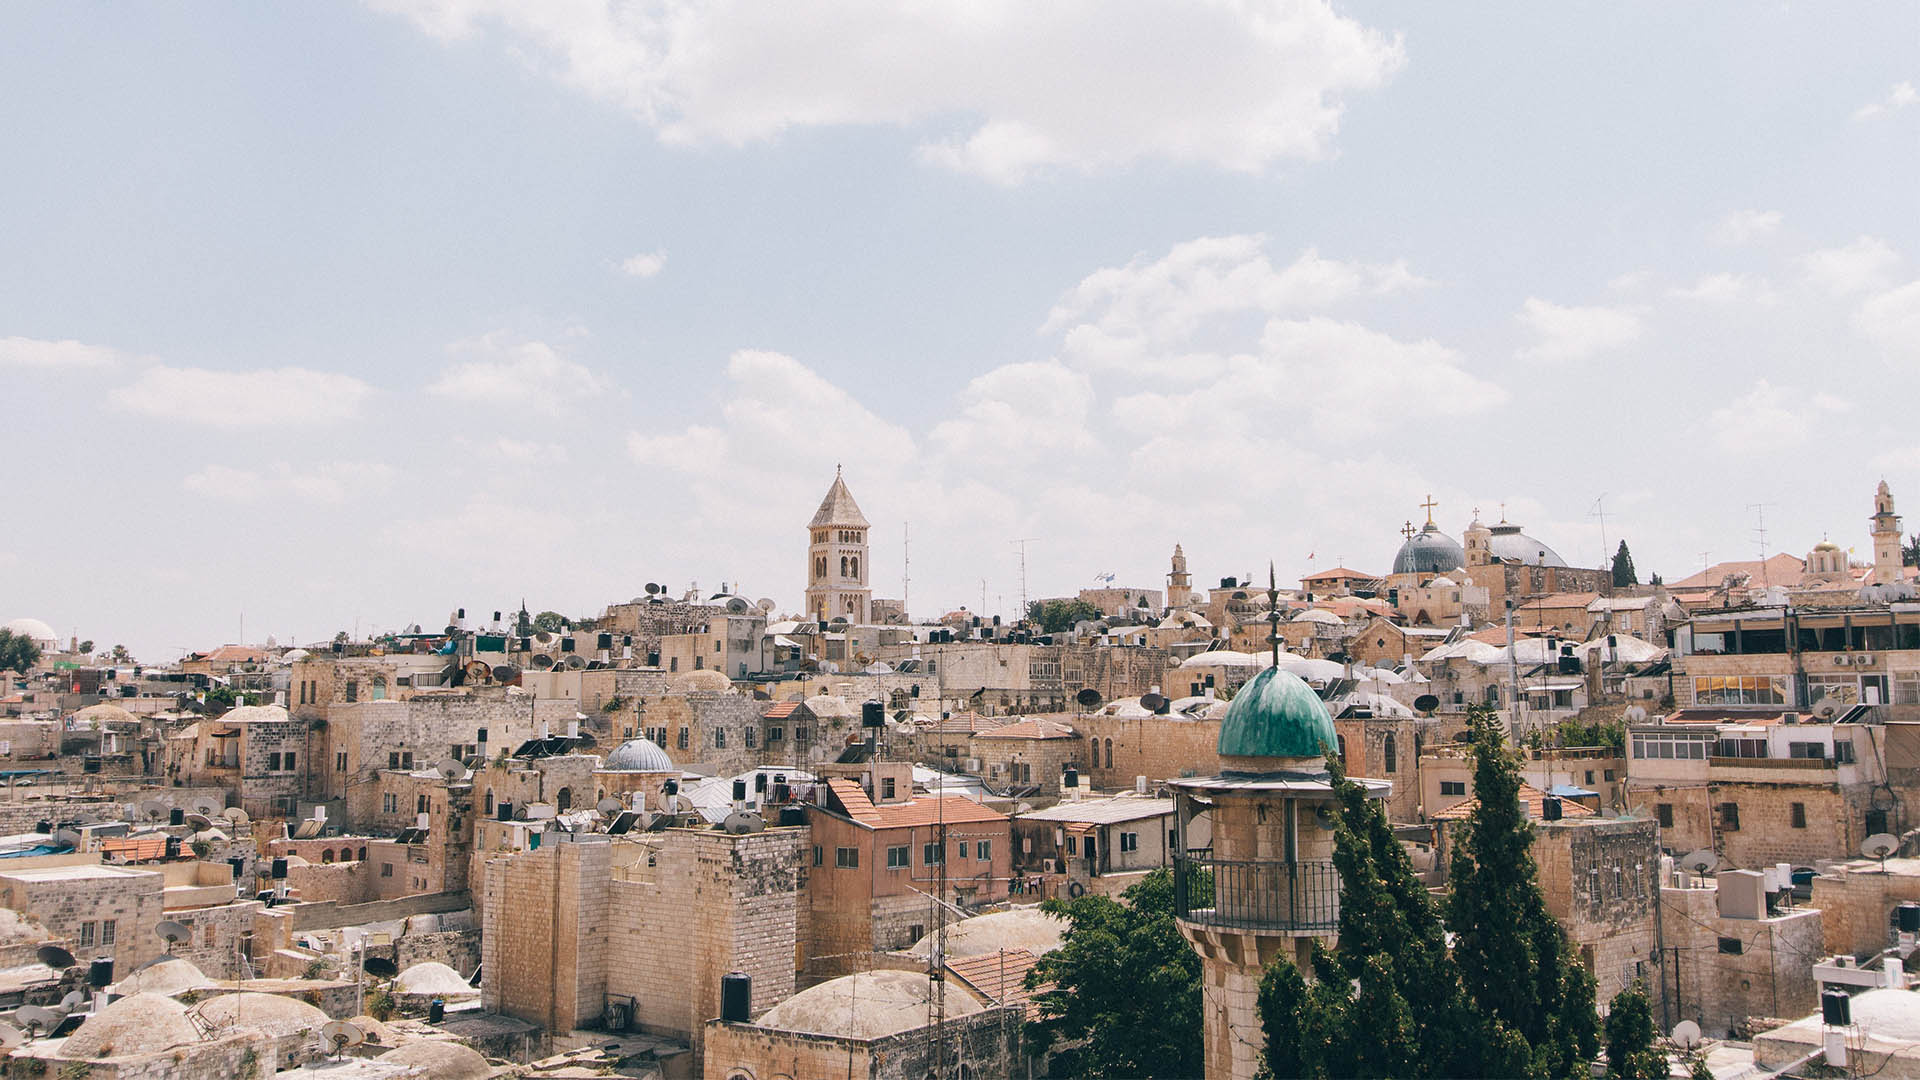 Jerusalem: One of the main tourist destinations in Israel, The Holy City. 1920x1080 Full HD Wallpaper.